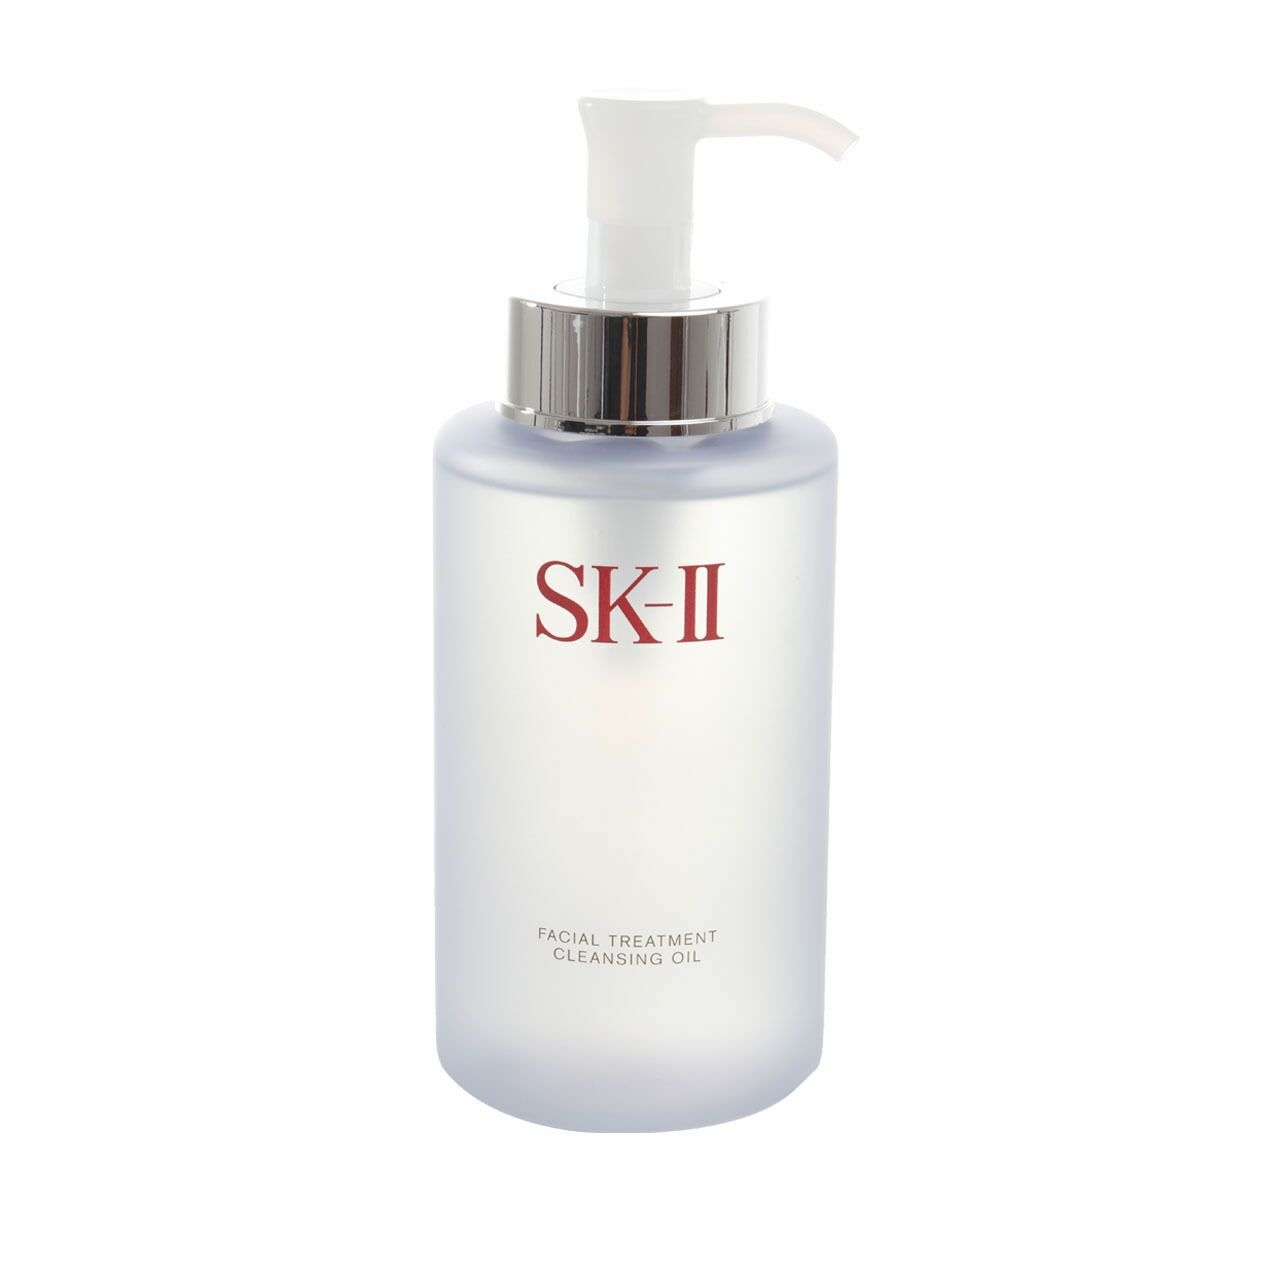 SK-II Facial Treatment Cleansing Oil Skin Care